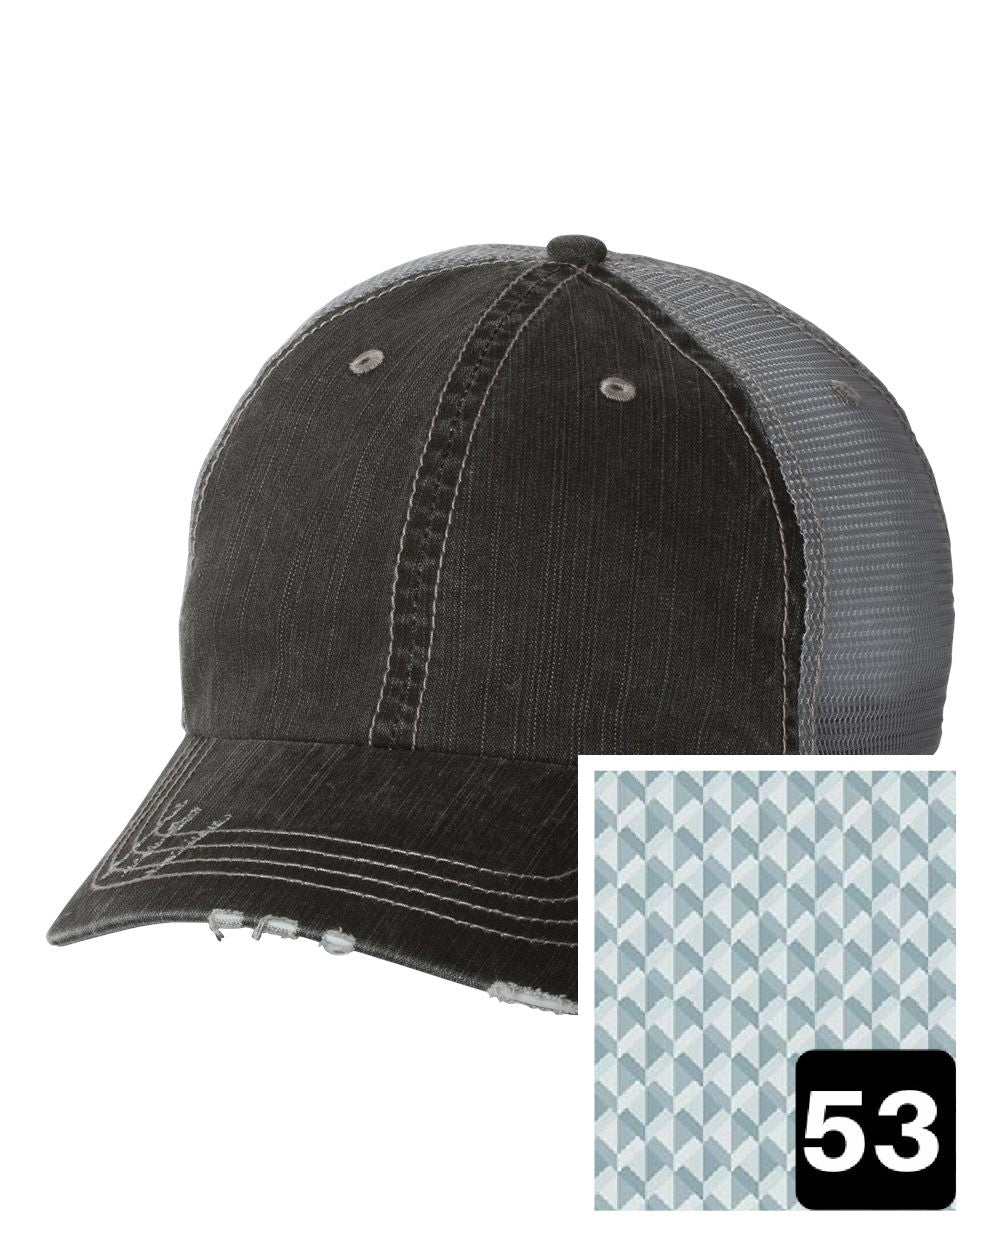 gray distressed trucker hat with multi-color stripe fabric state of Michigan